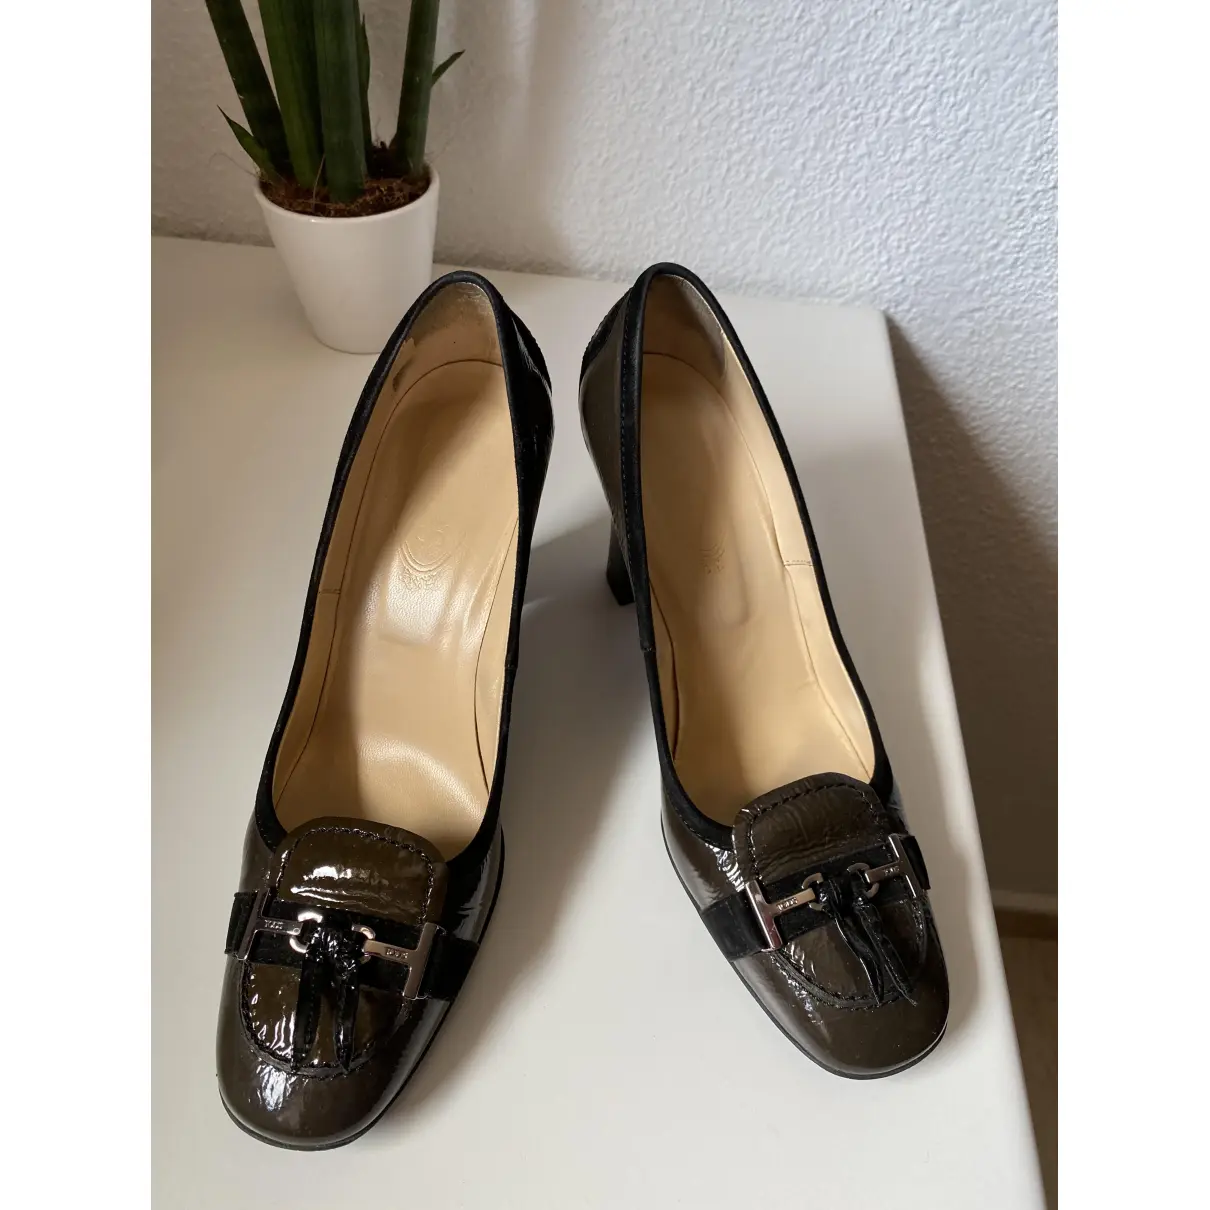 Buy Tod's Patent leather heels online